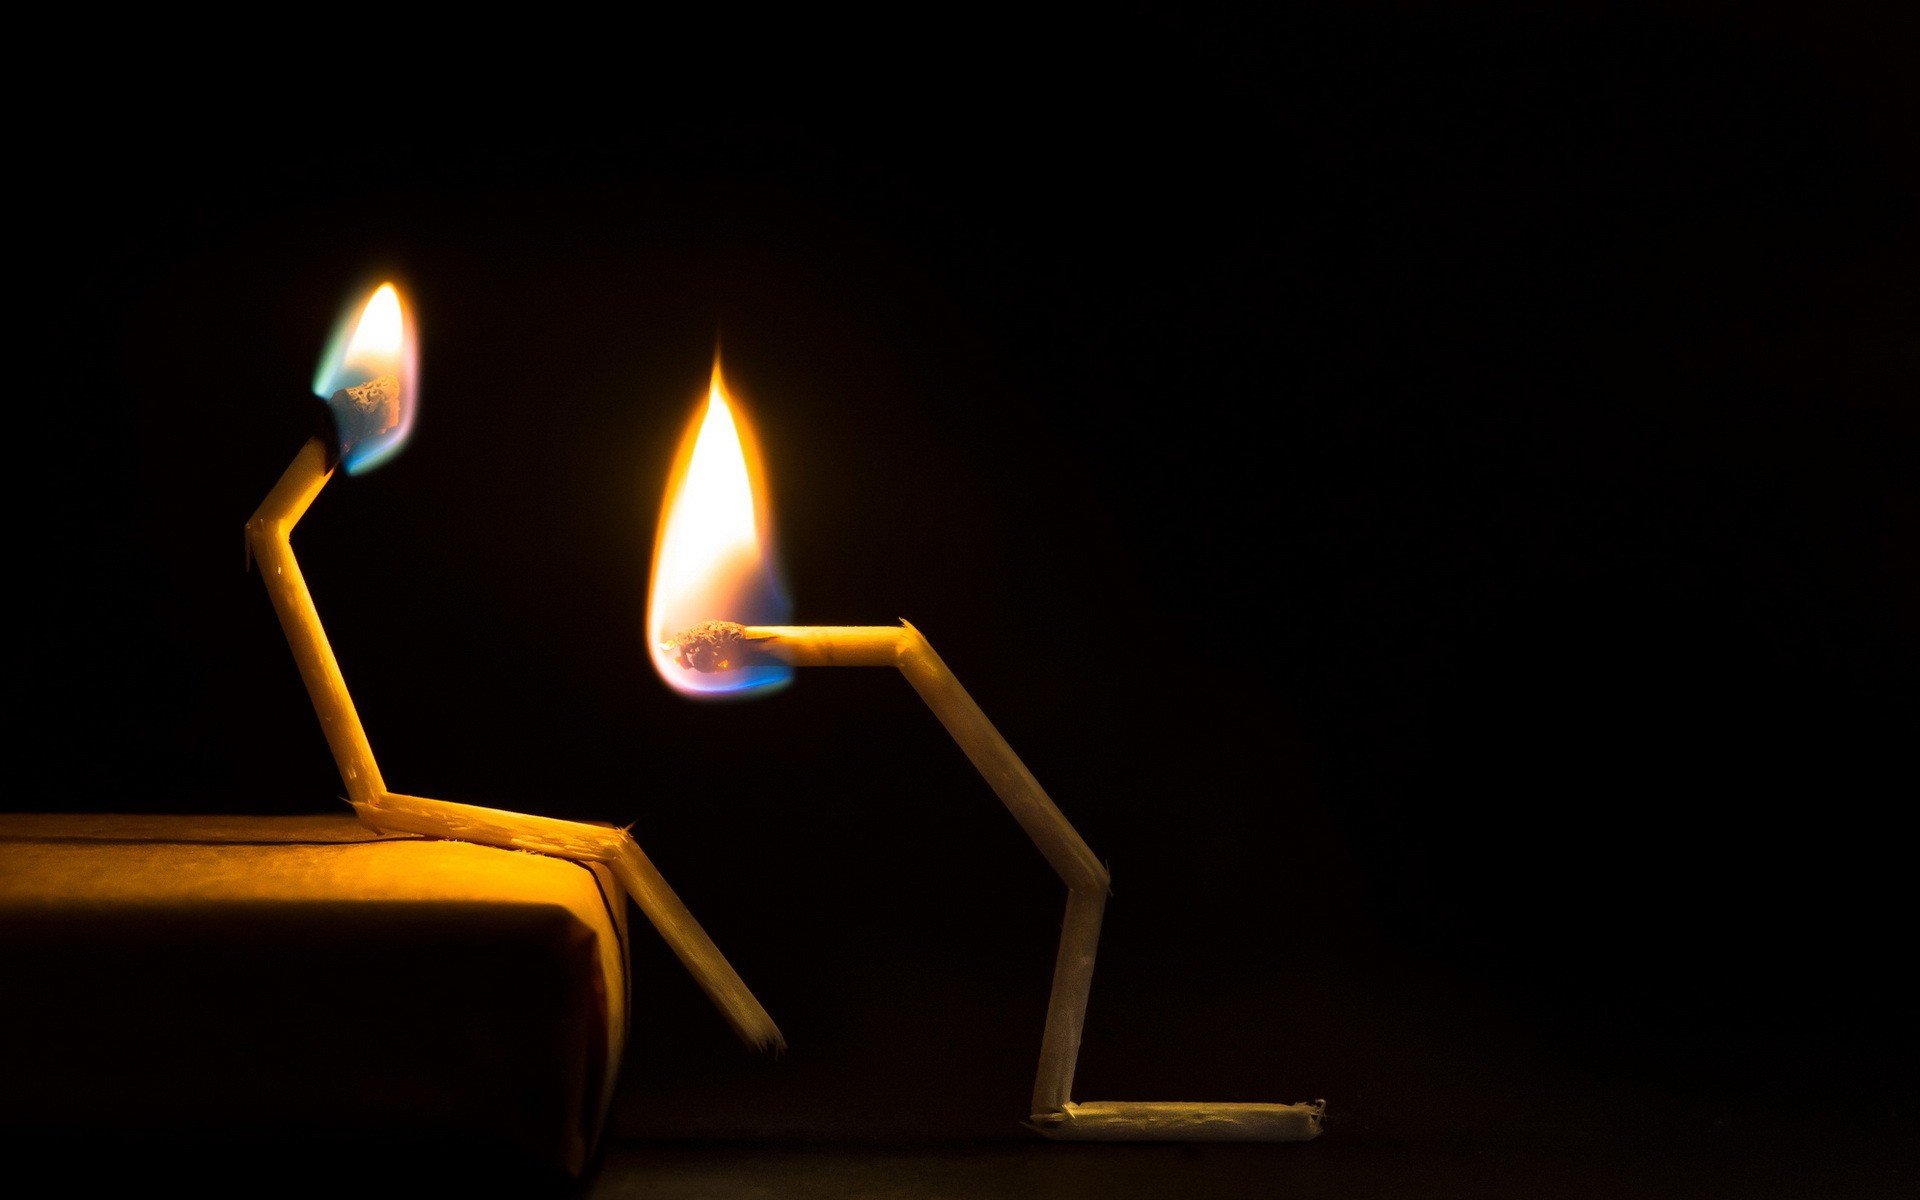 Creativity Humor Matches Fire Burning Love Black Background Sitting Abstract 1920x1200